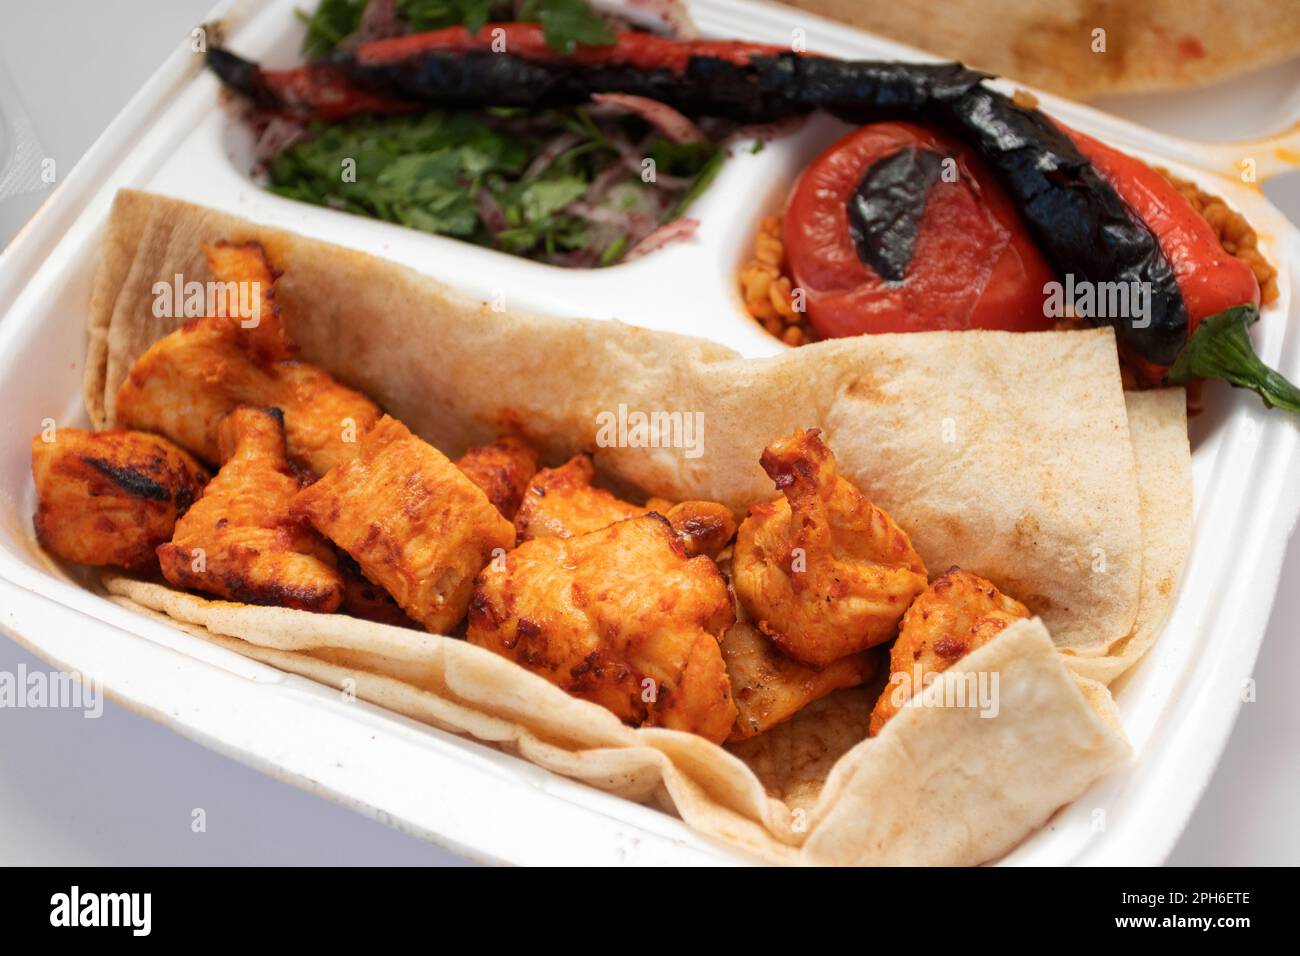 Shish kebab and pita bread on a disposable plate. Turkish food. Food delivery Stock Photo